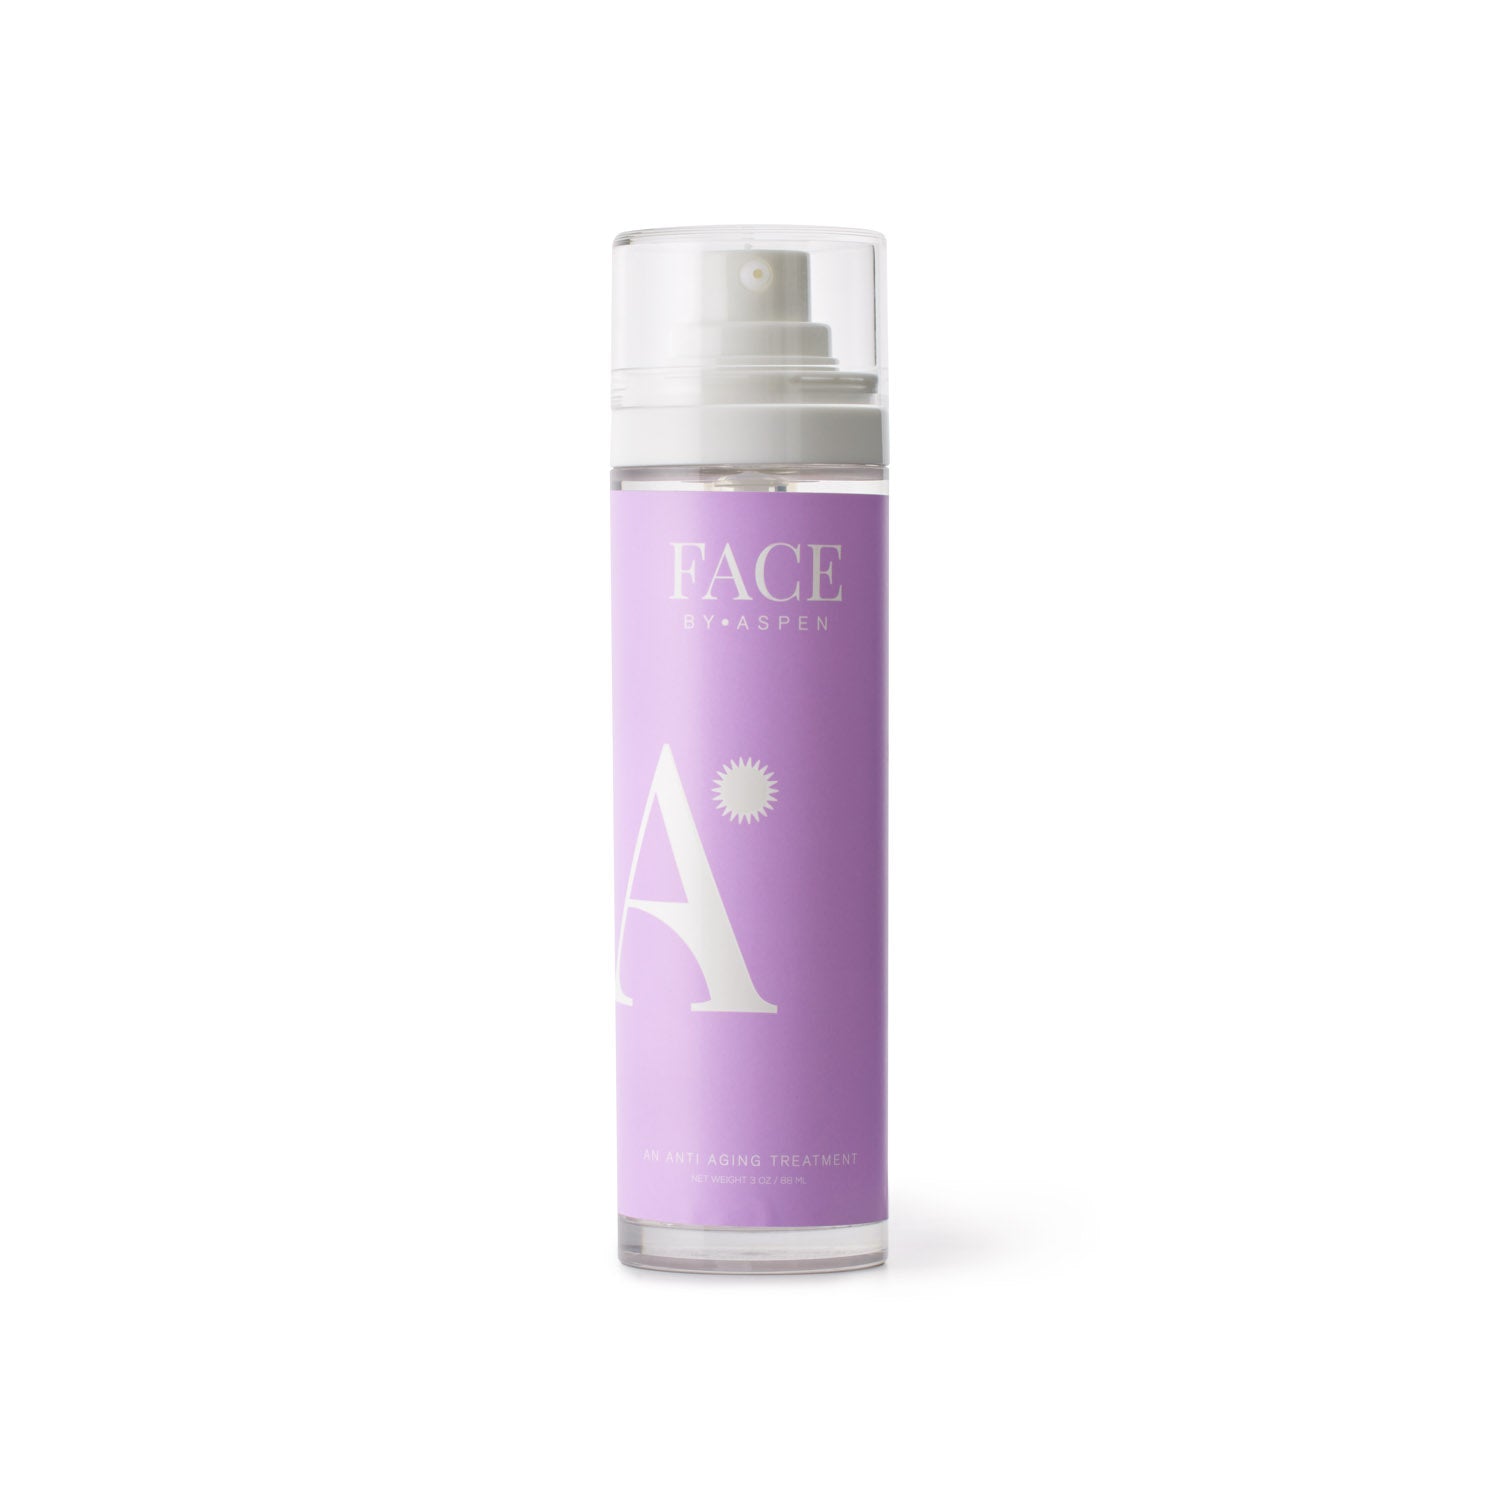 Face by Aspen: An Anti-Aging Treatment